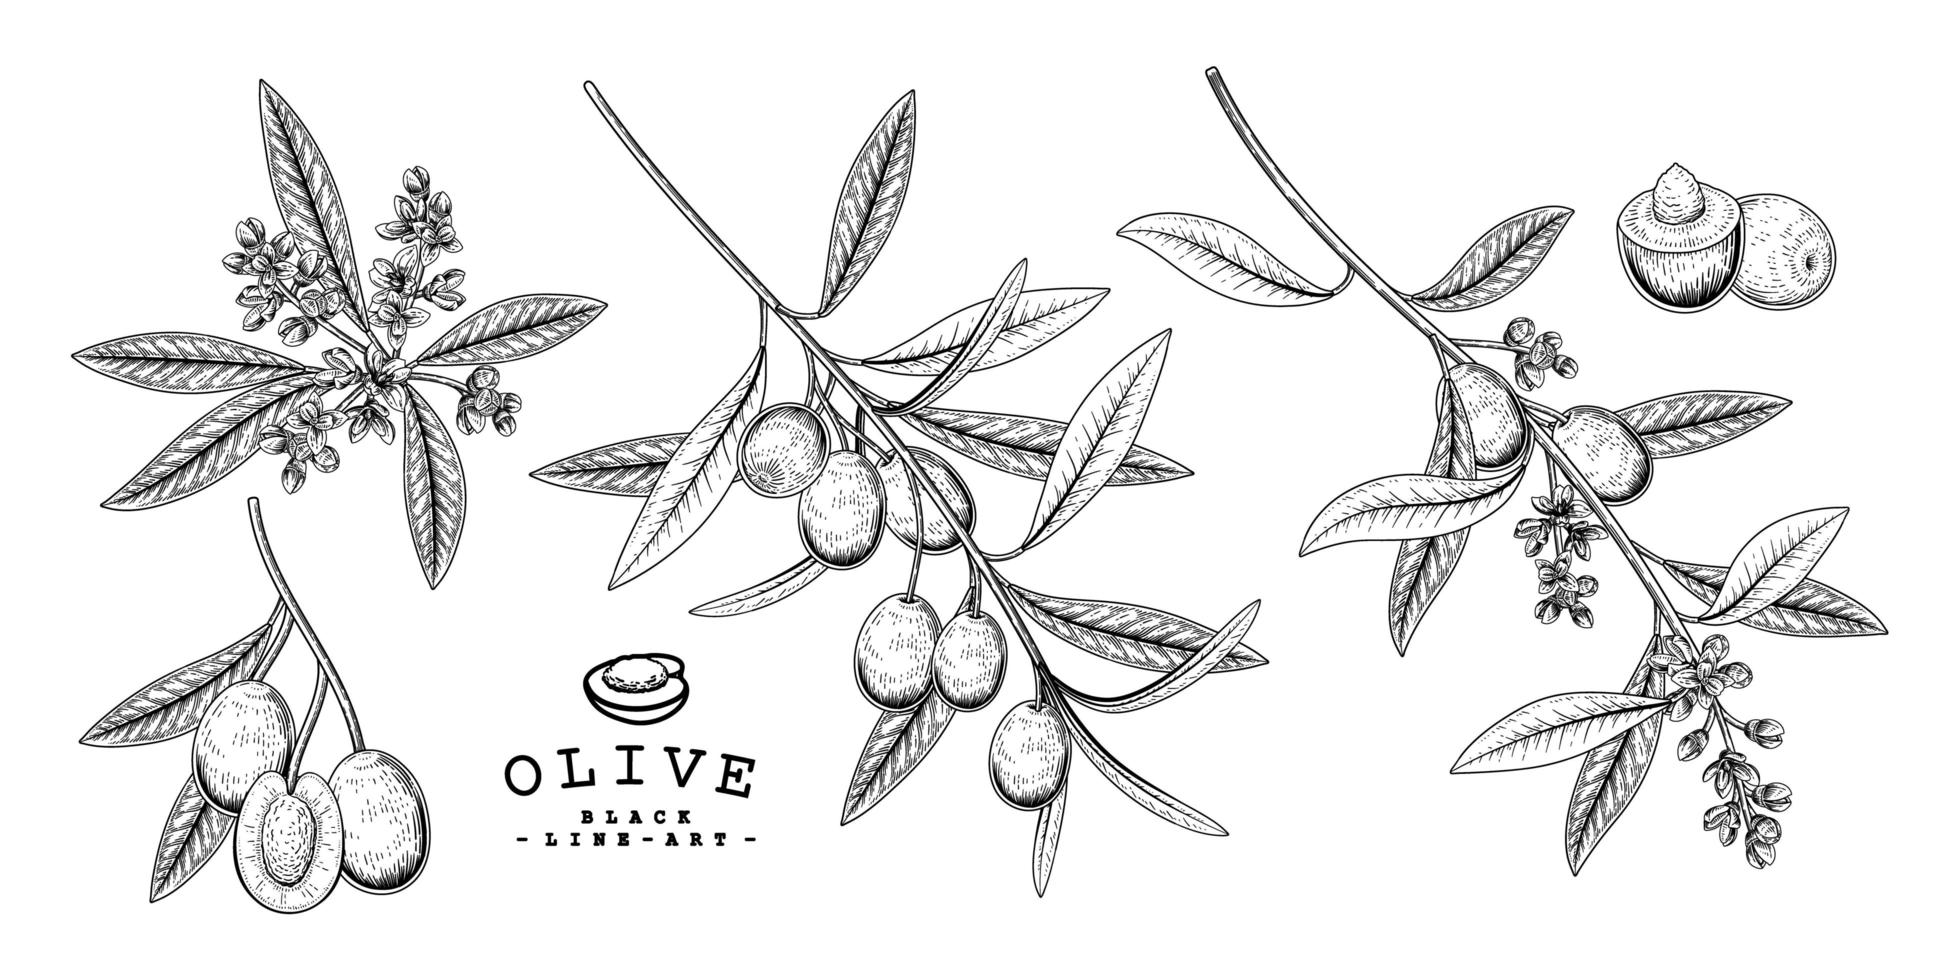 Whole half slice and branch of olive with fruits and flowers Hand drawn Sketch Botanical illustrations decorative set vector